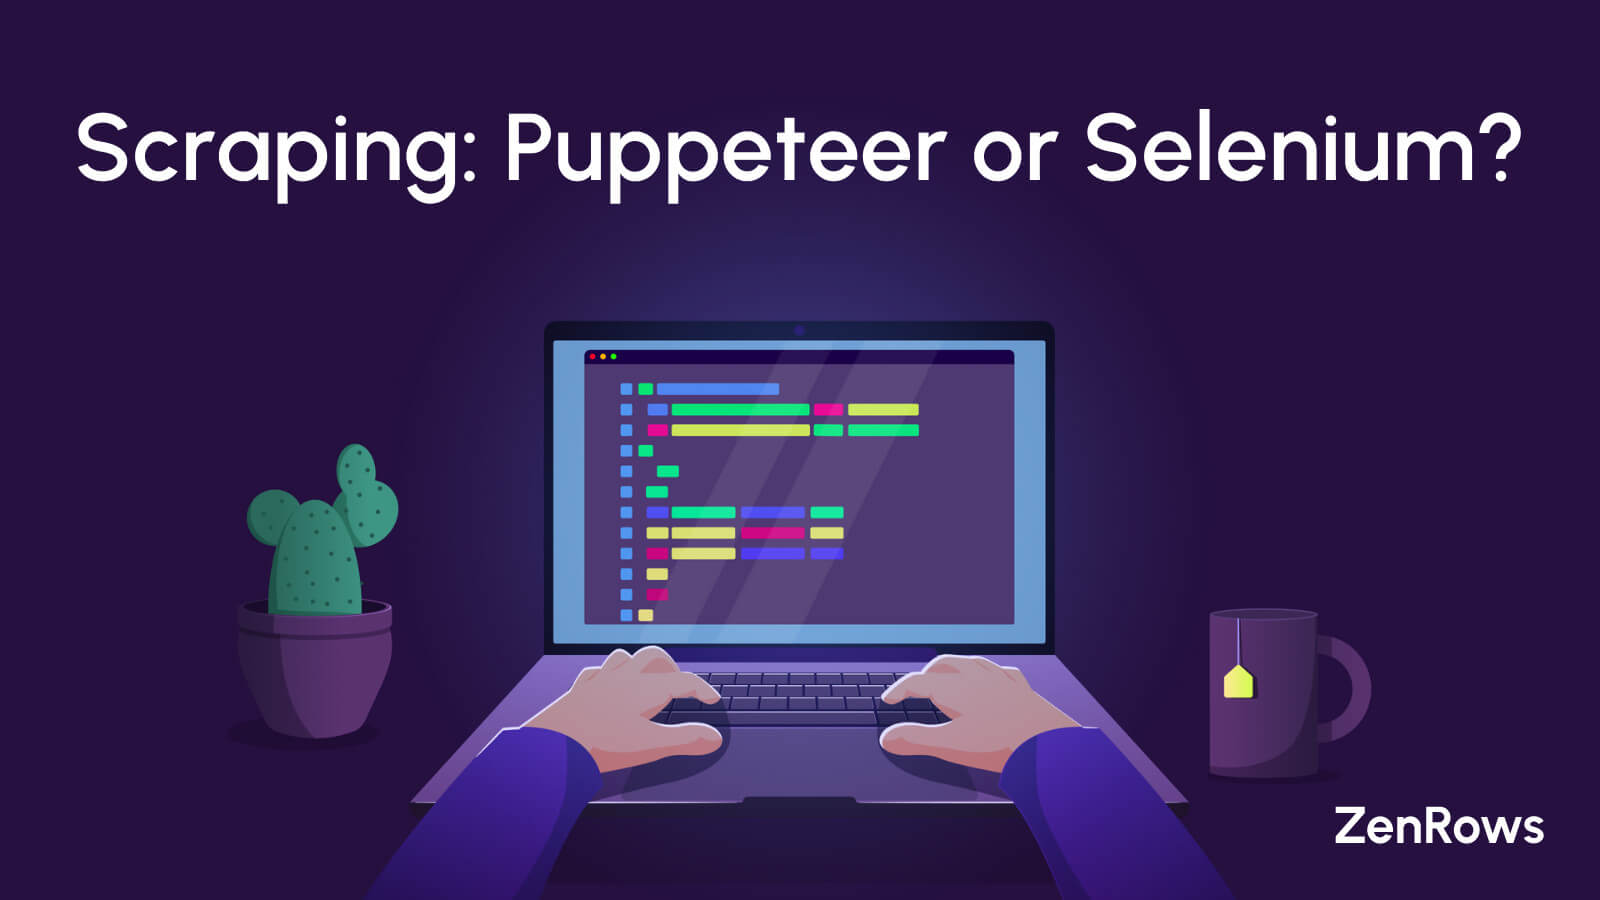 Puppeteer vs Selenium: Which Is Better in 2023